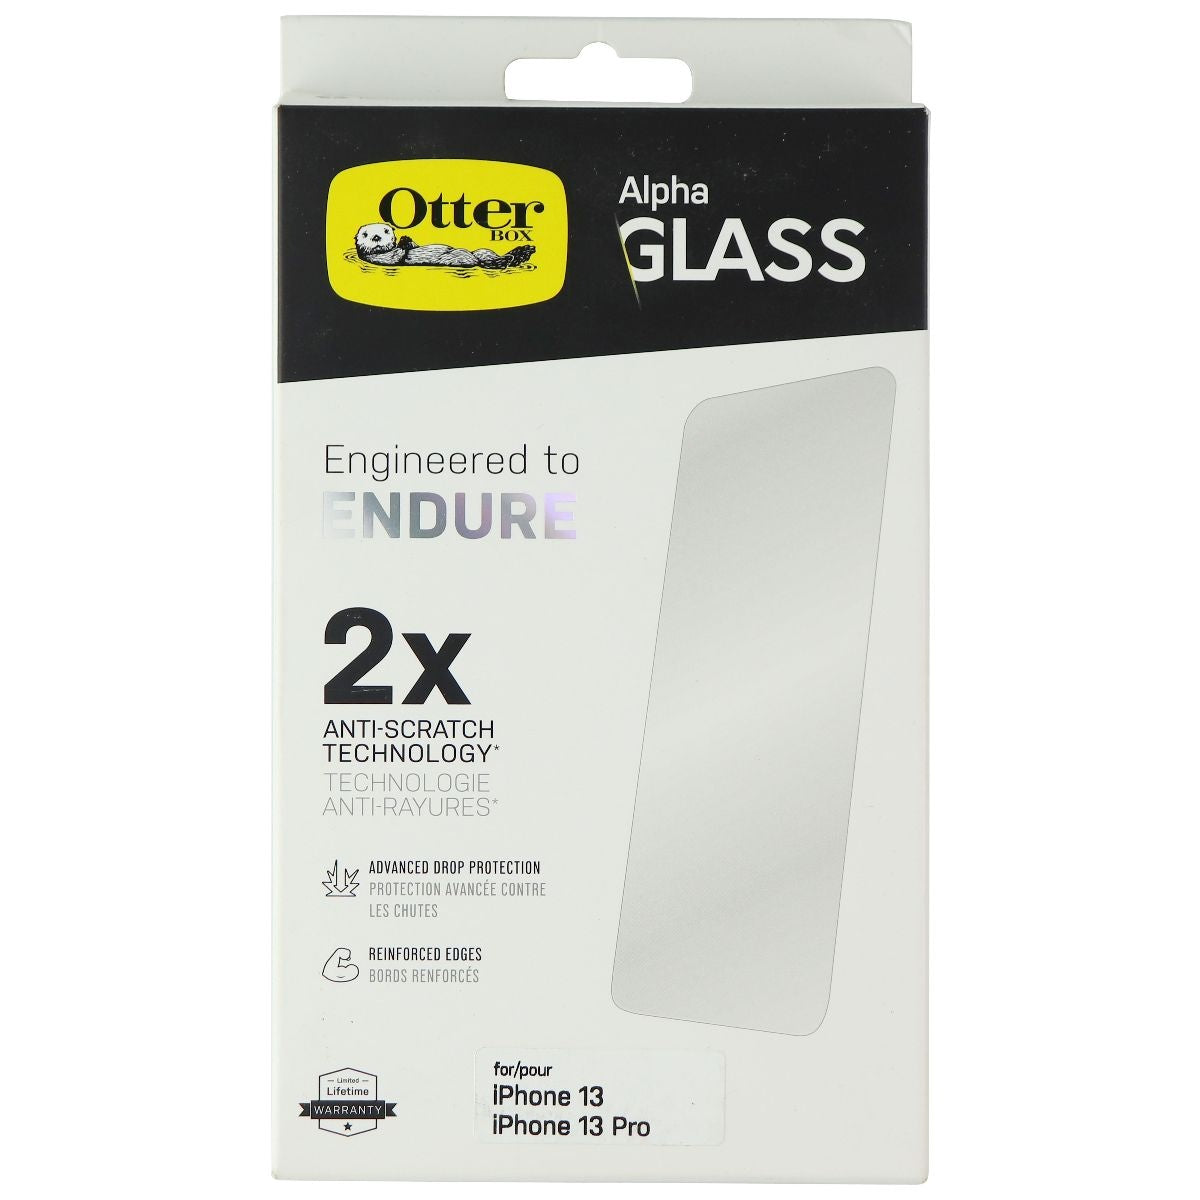 OtterBox Alpha Glass Screen Protector for Apple iPhone 13 Pro & 13 - Clear